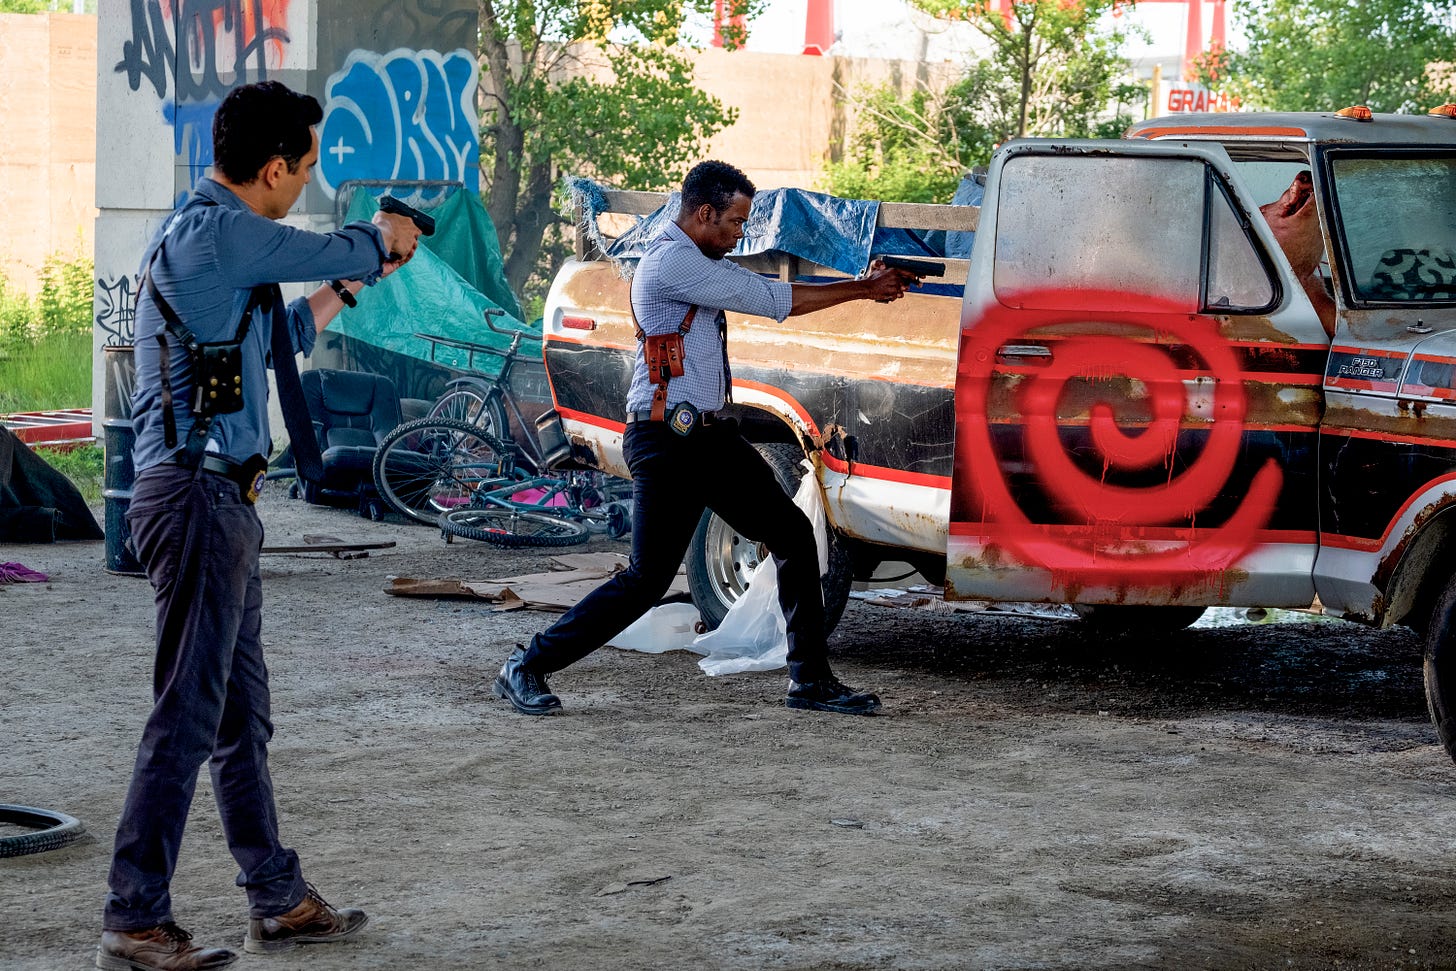 From the film "Spiral": Chris Rock plays a detective who, with his partner, have guns drawn as they approach avehicle with a red spiral spray painted on the door.